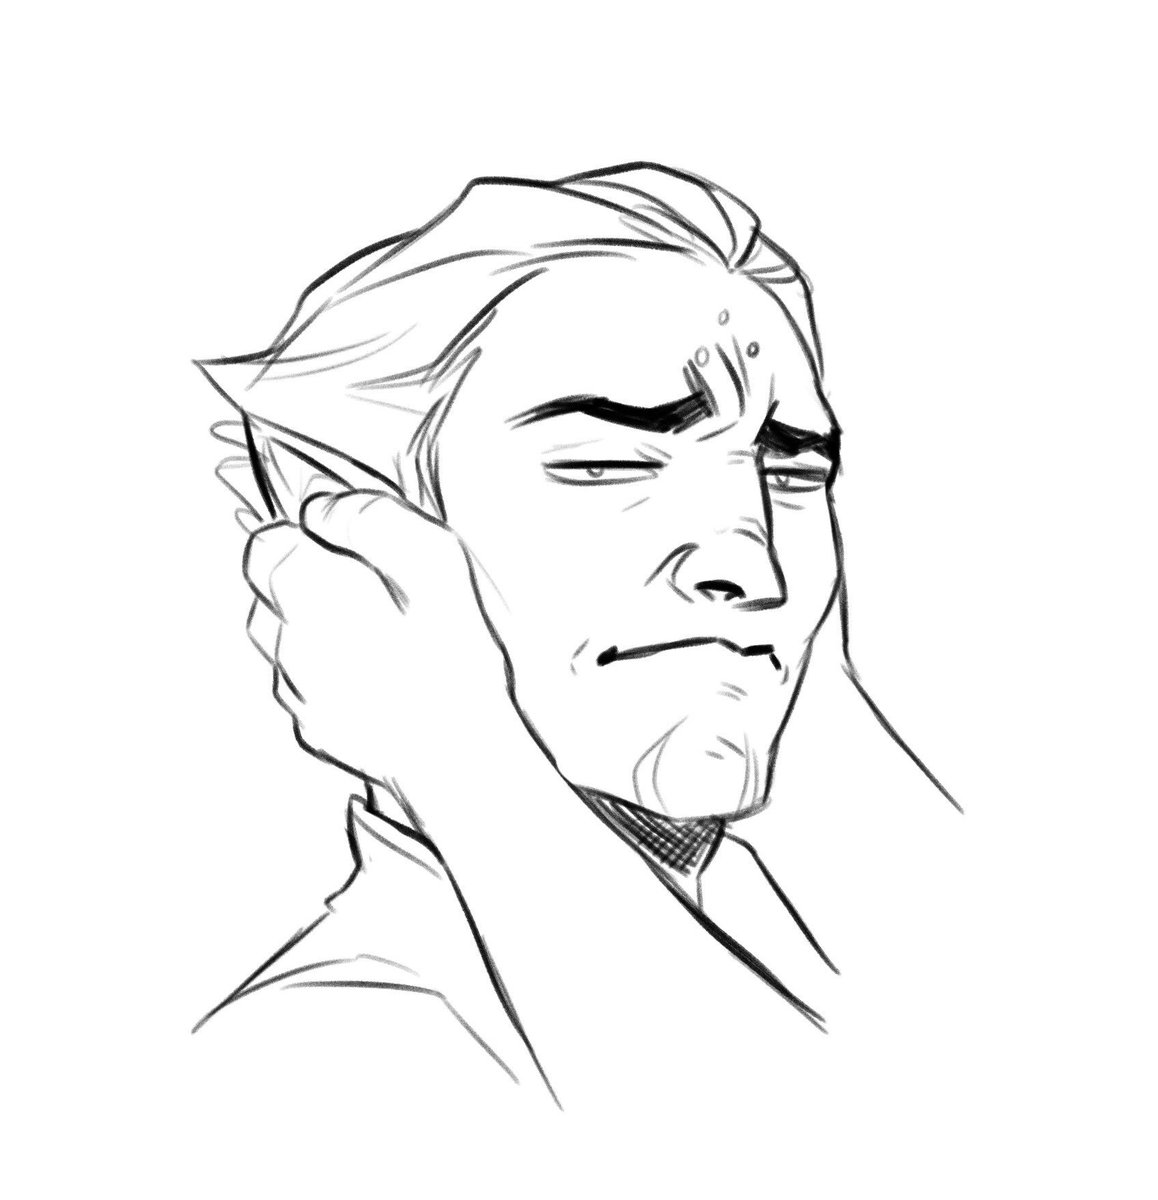 Varric is bestfriend of the year and fenris is just done with them 